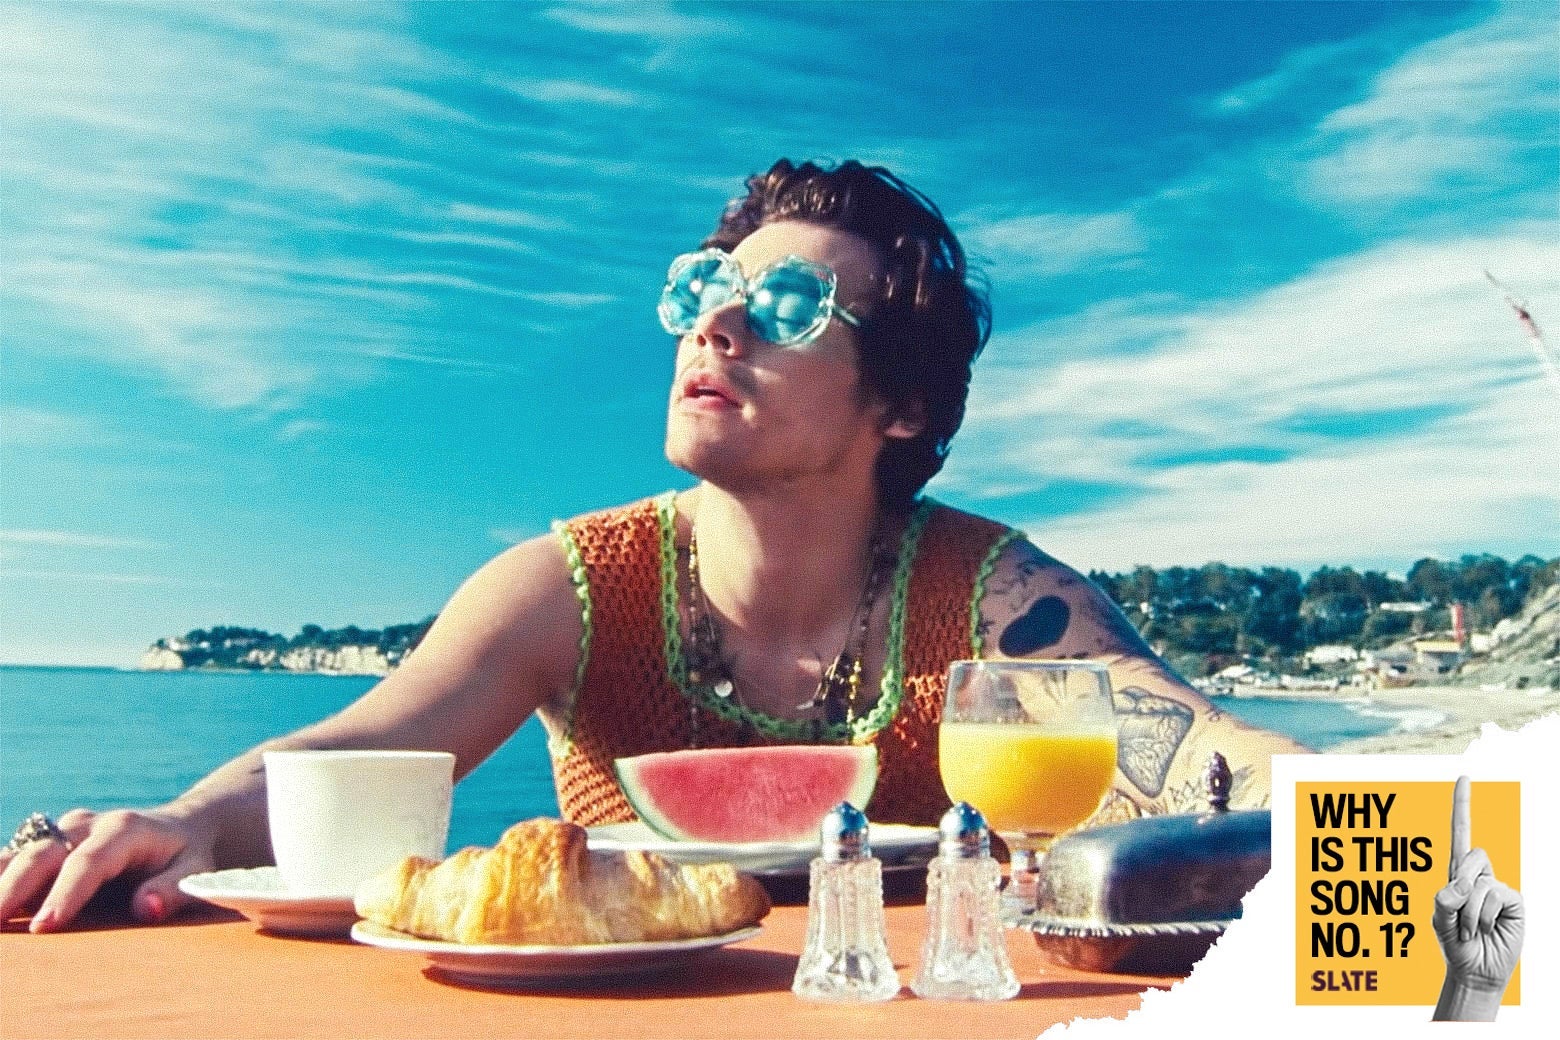 Still from the "Watermelon Sugar" video in which Harry Styles, wearing sunglasses, sits at a table on the beach with a slice of watermelon, a croissant, orange juice, a coffee cup, a butter dish, and salt and pepper shakers in front of him